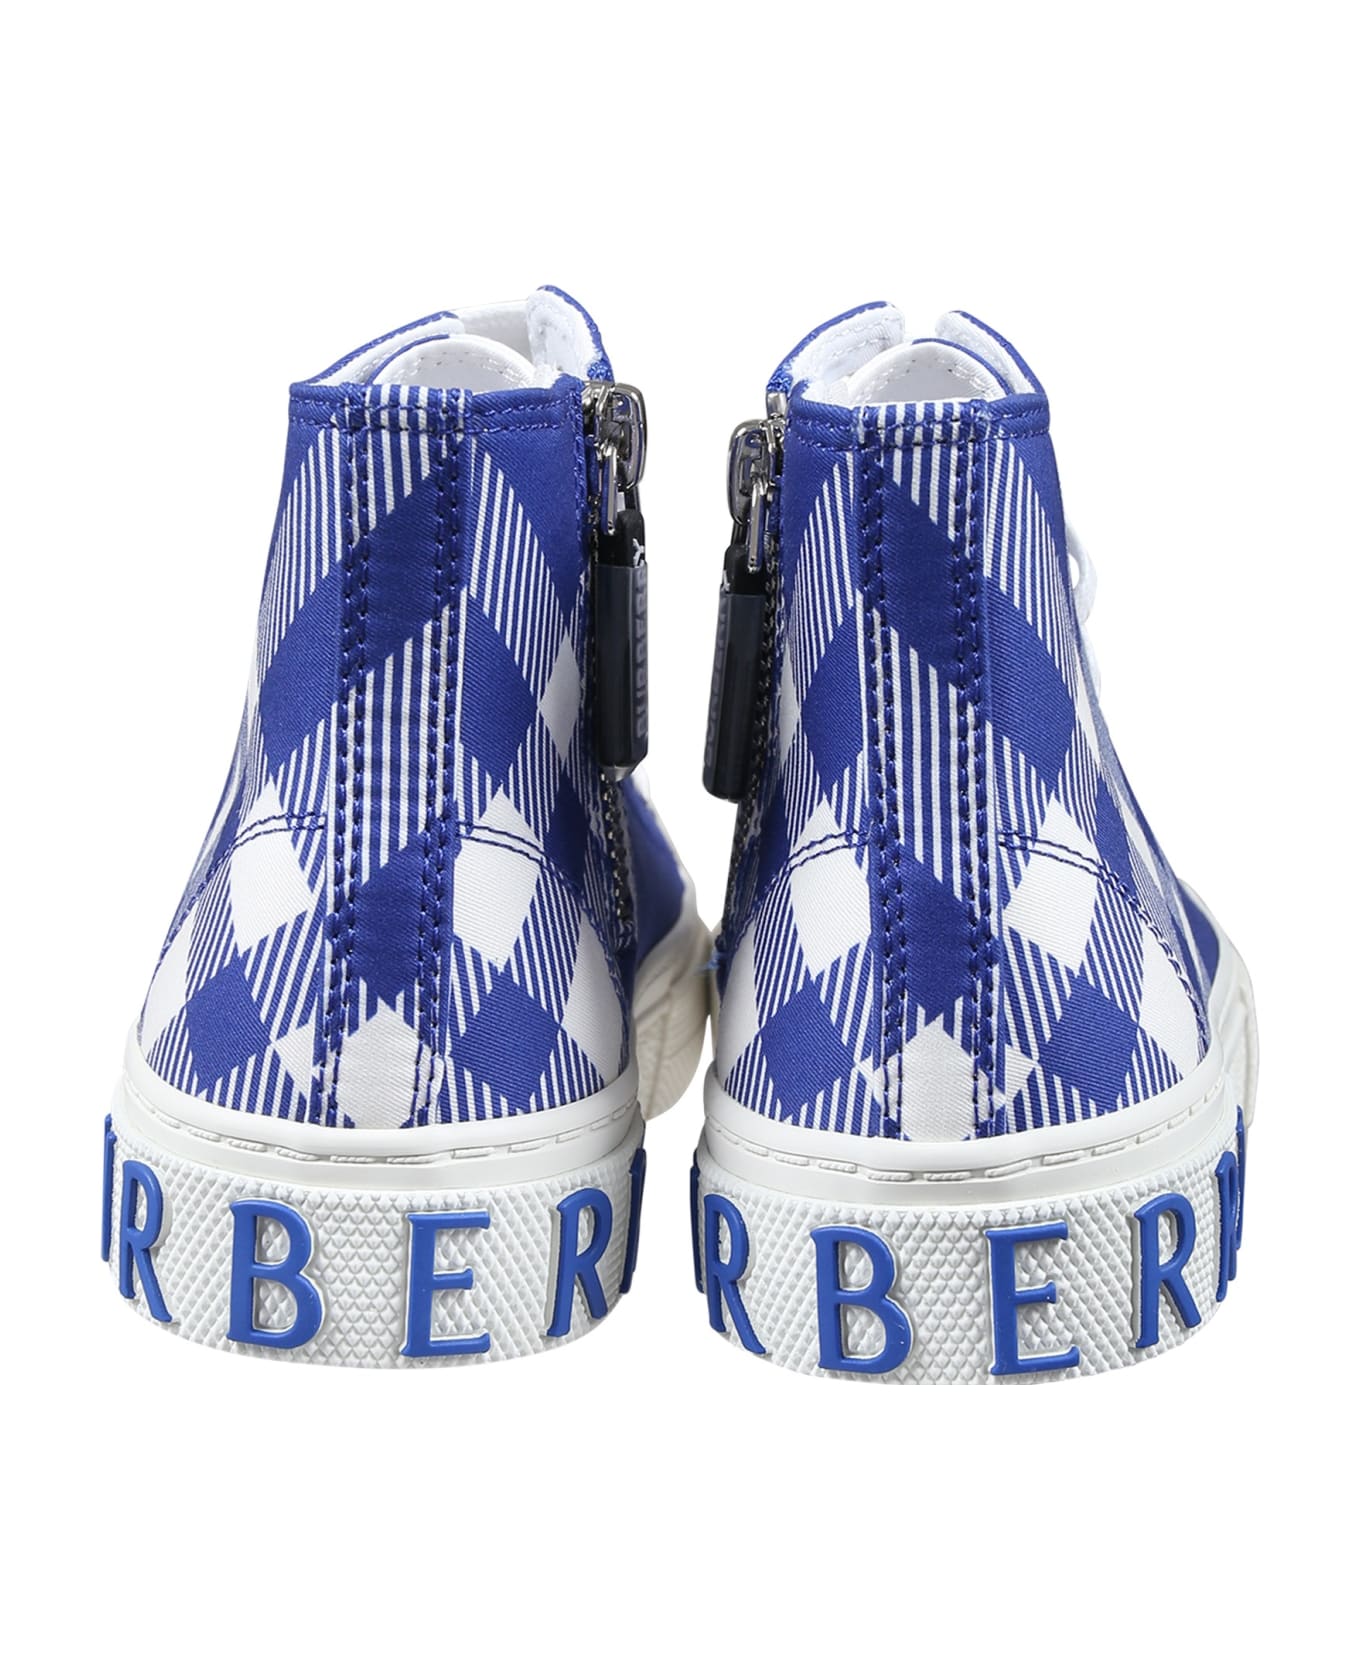 Burberry Blue Sneakers For Kids With Logo - Blu